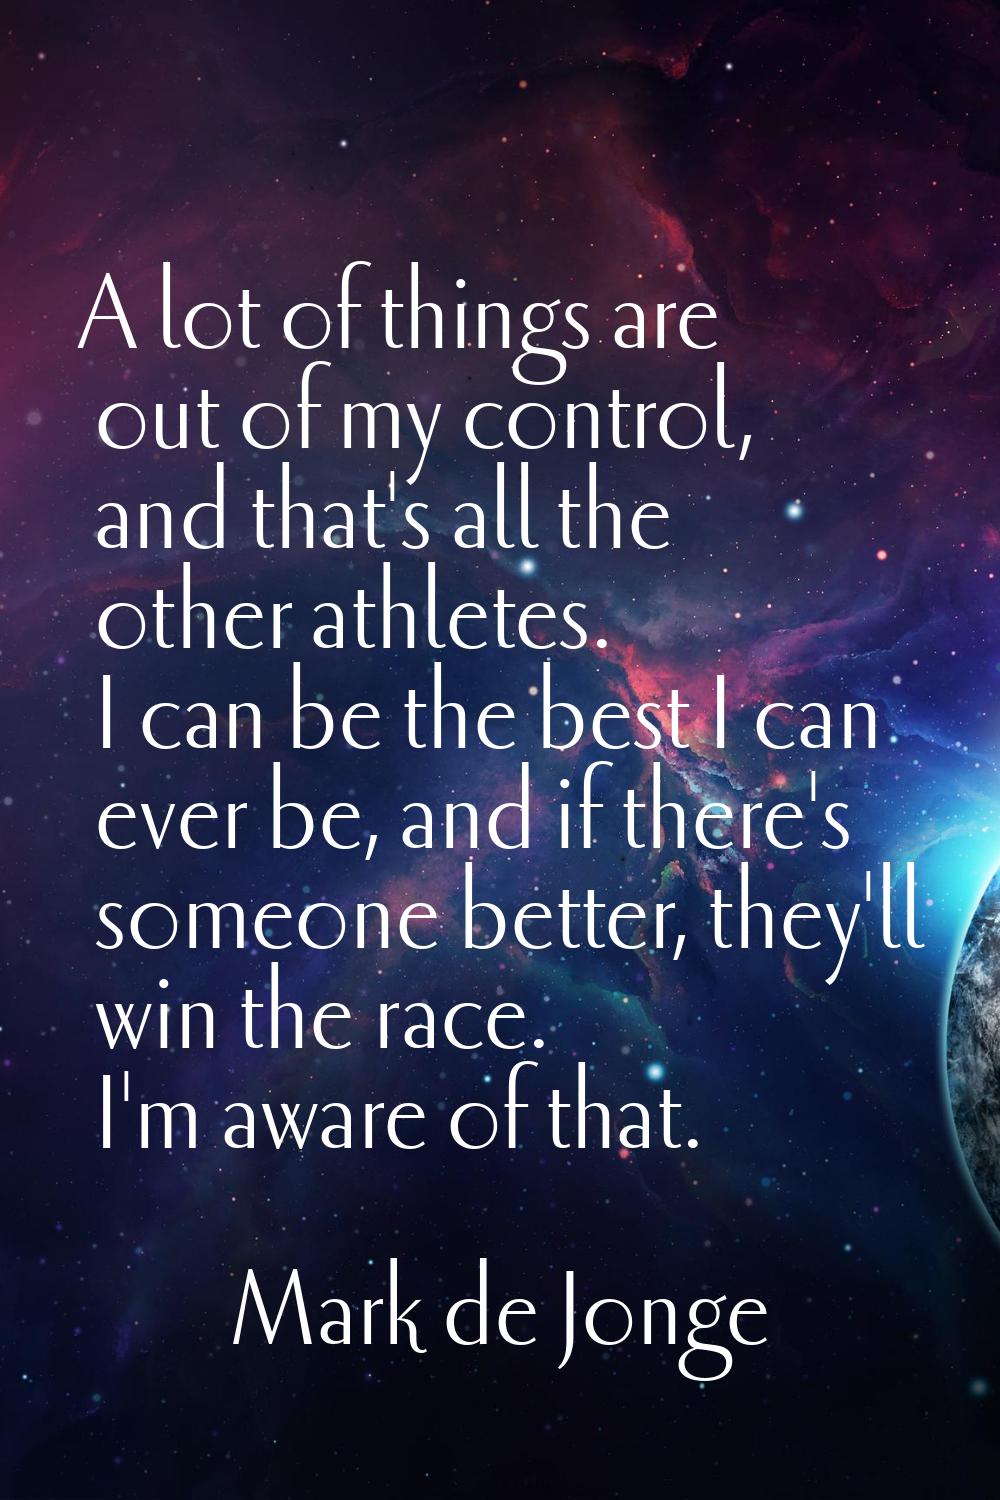 A lot of things are out of my control, and that's all the other athletes. I can be the best I can e